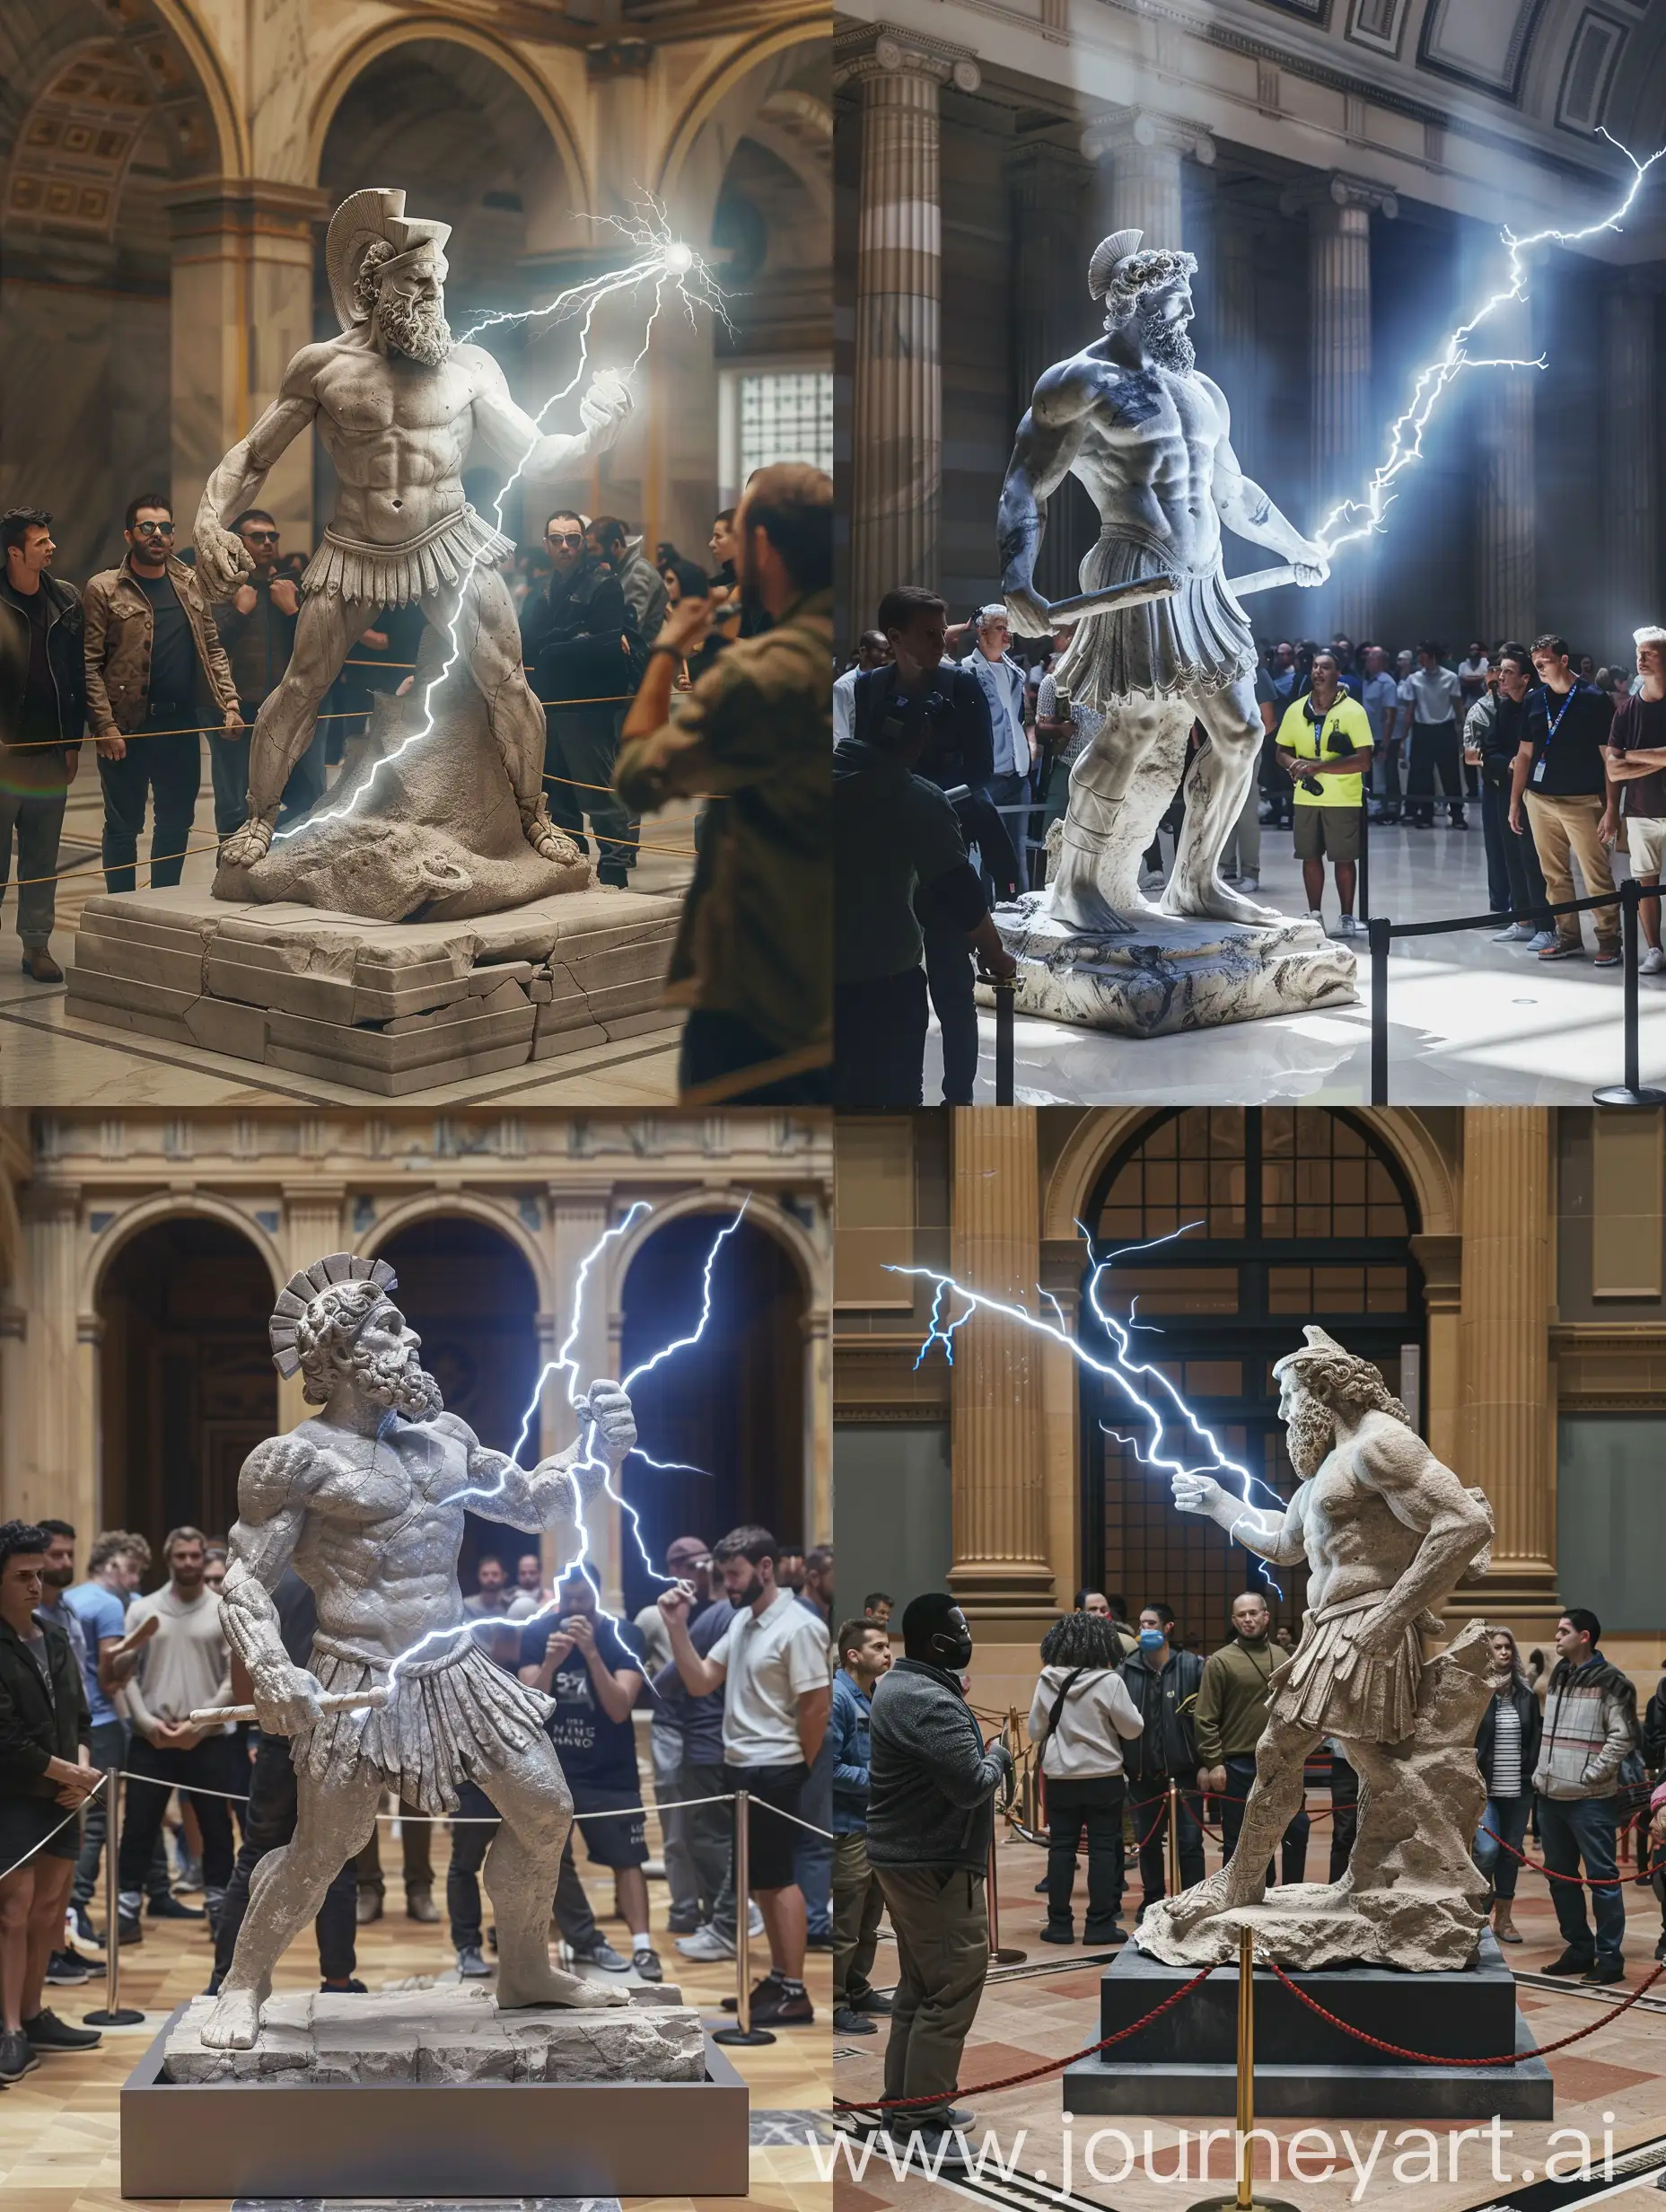 In the museum's grand hall, amidst a scene frozen in time, Zeus appears in a dynamic fighting stance, his stone form poised for battle. The sculpture captures the essence of ancient Greek mythology, with Zeus wielding a thunderbolt in his hand, crackling with real electric energy. The fusion of classical artistry and modern technology is evident, as the sculpture's stone surface contrasts sharply with the pulsating energy of the thunderbolt.

Spectators surround the sculpture, held back by a cordoned-off area and watched over by vigilant security guards. Their faces are a mix of awe and trepidation as they witness the monumental artwork before them, recognizing it as one of the most important pieces in history.

As the camera pans around the scene, capturing the intensity of the moment, the juxtaposition of ancient and modern becomes even more pronounced. The classical beauty of Zeus's form clashes with the raw power of the thunderbolt, creating a visual spectacle that transcends time and space. This iconic image captures the essence of Greek mythology while showcasing the possibilities of blending ancient art with contemporary technology.